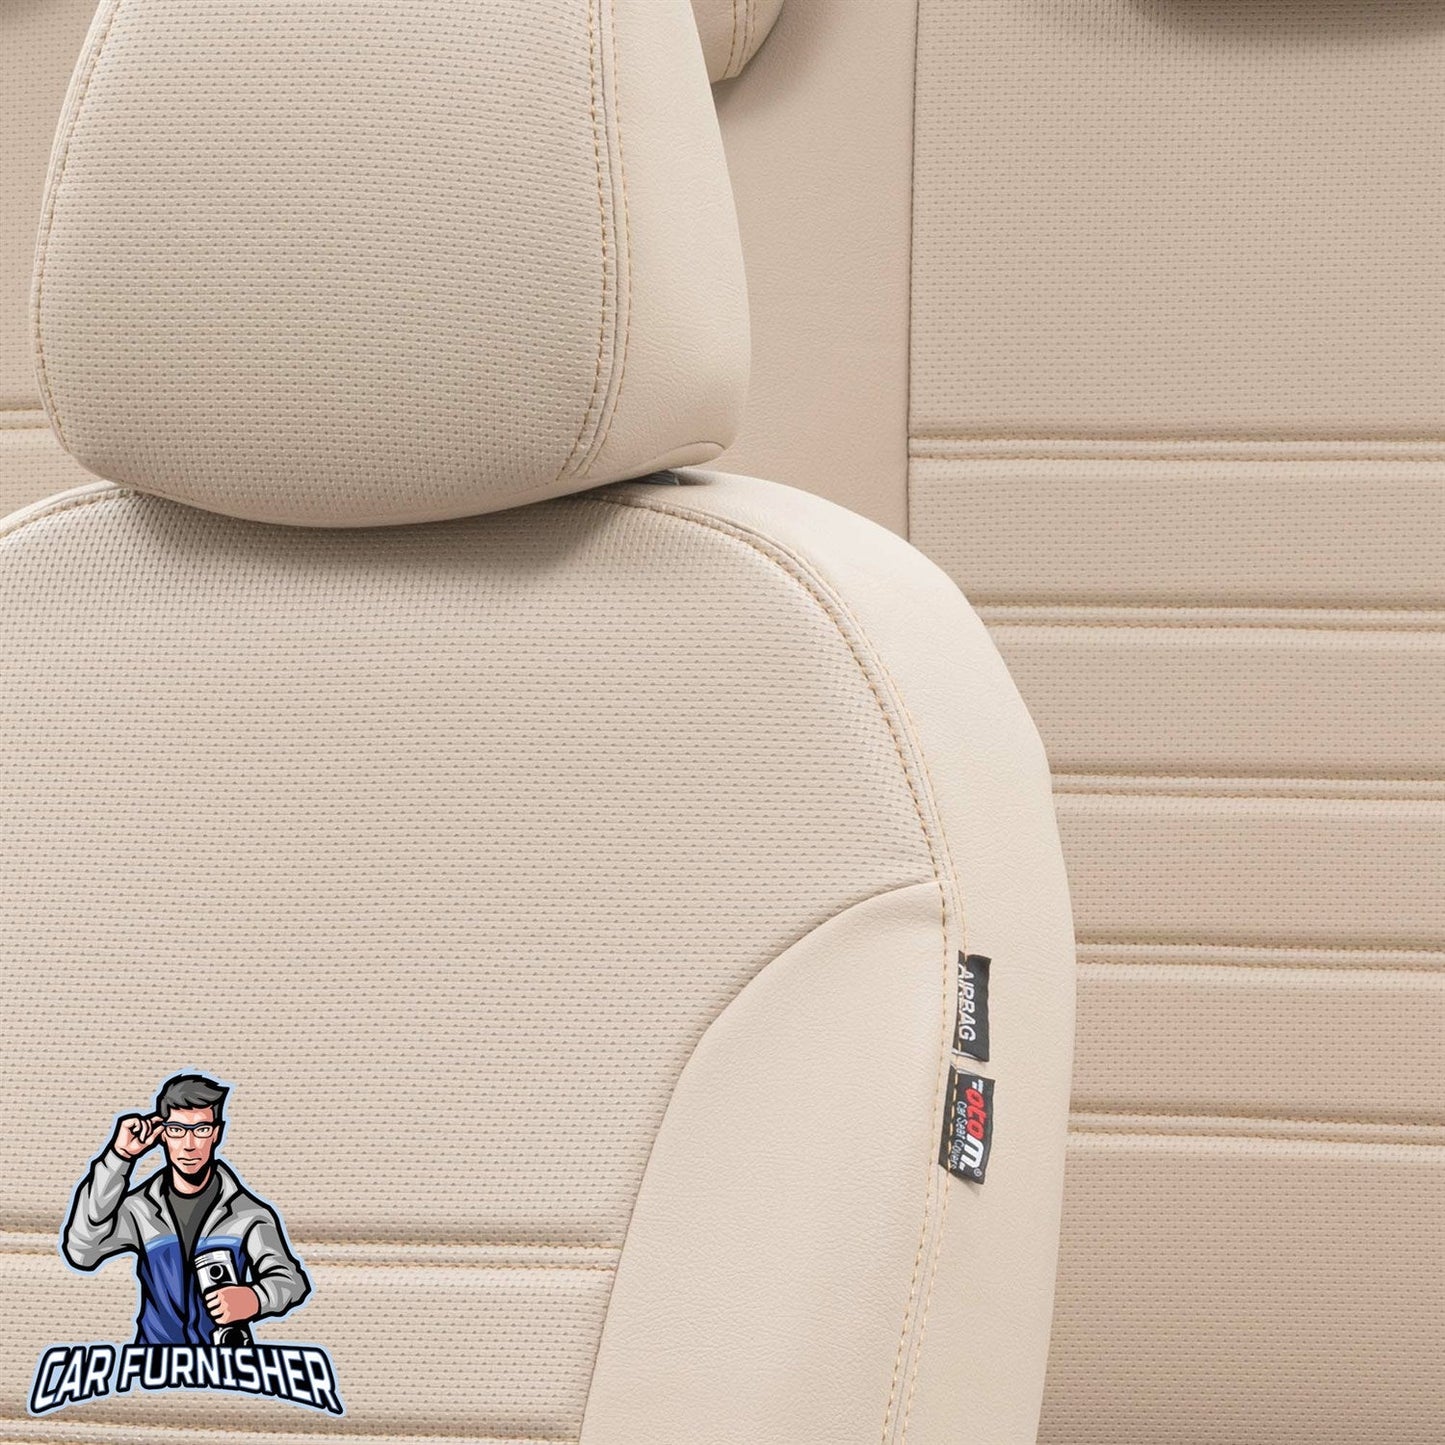 Volvo V40 Seat Cover New York Leather Design Beige Leather